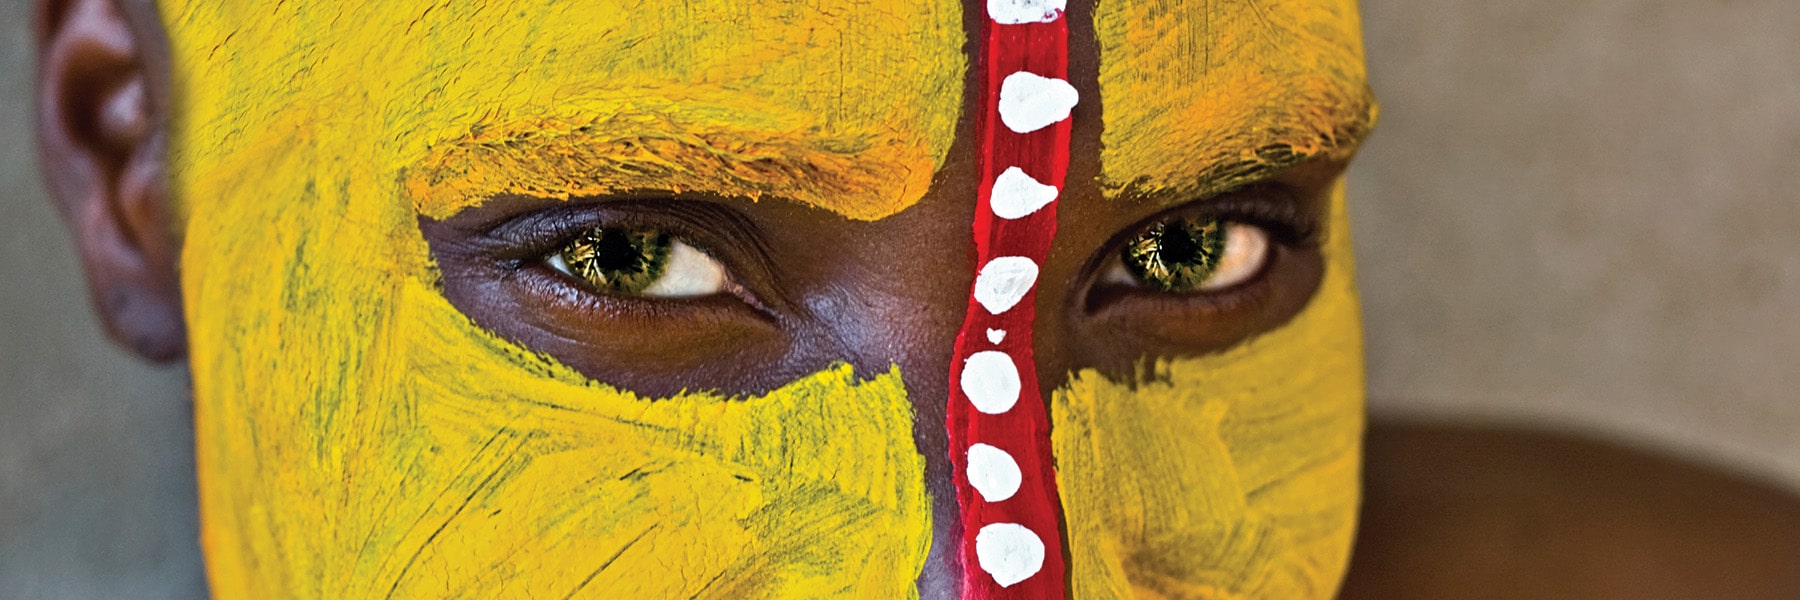 Closeup of a African tribe member's face with traditional paint